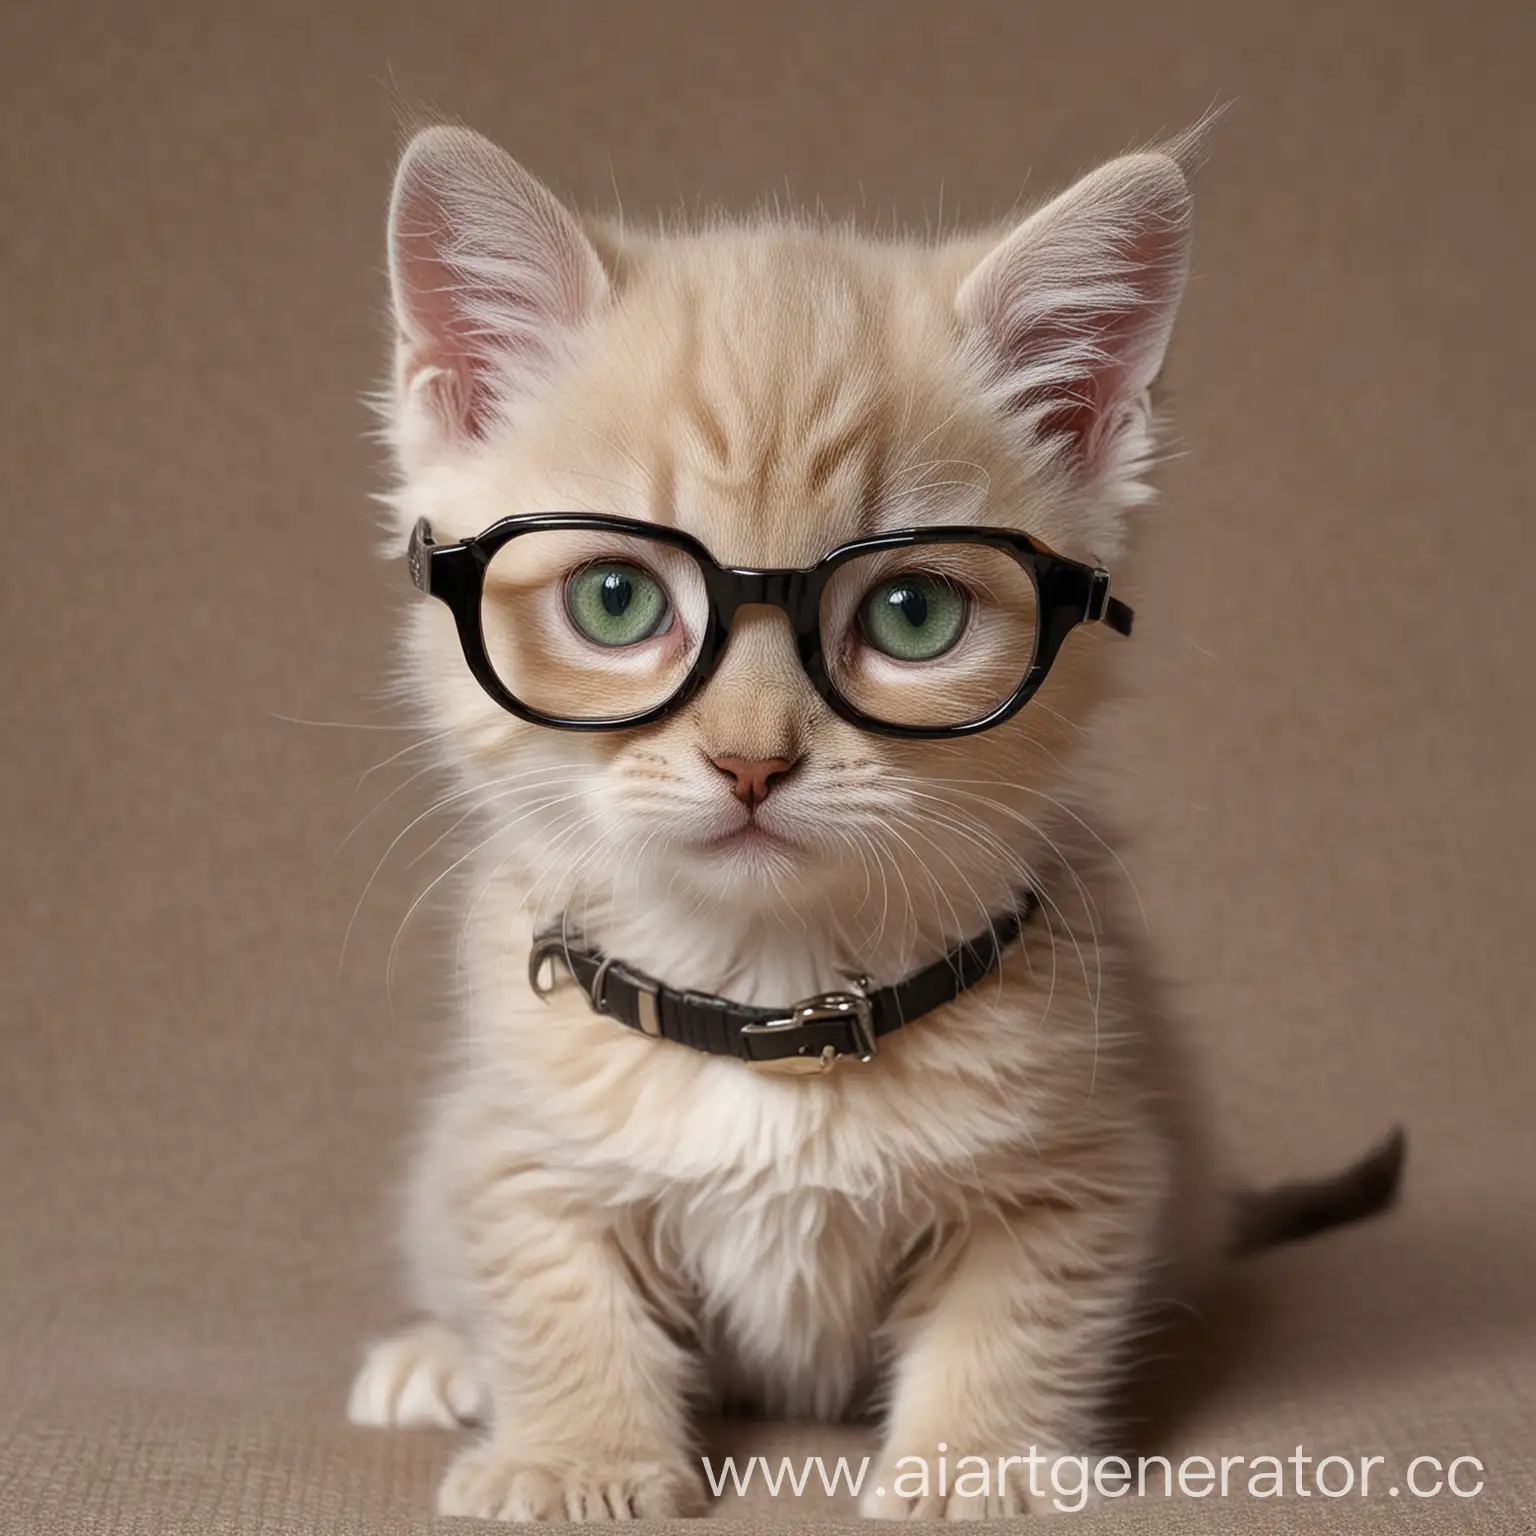 Adorable-GreenEyed-Kitten-with-Glasses-Cute-Pet-Portrait-for-Animal-Lovers